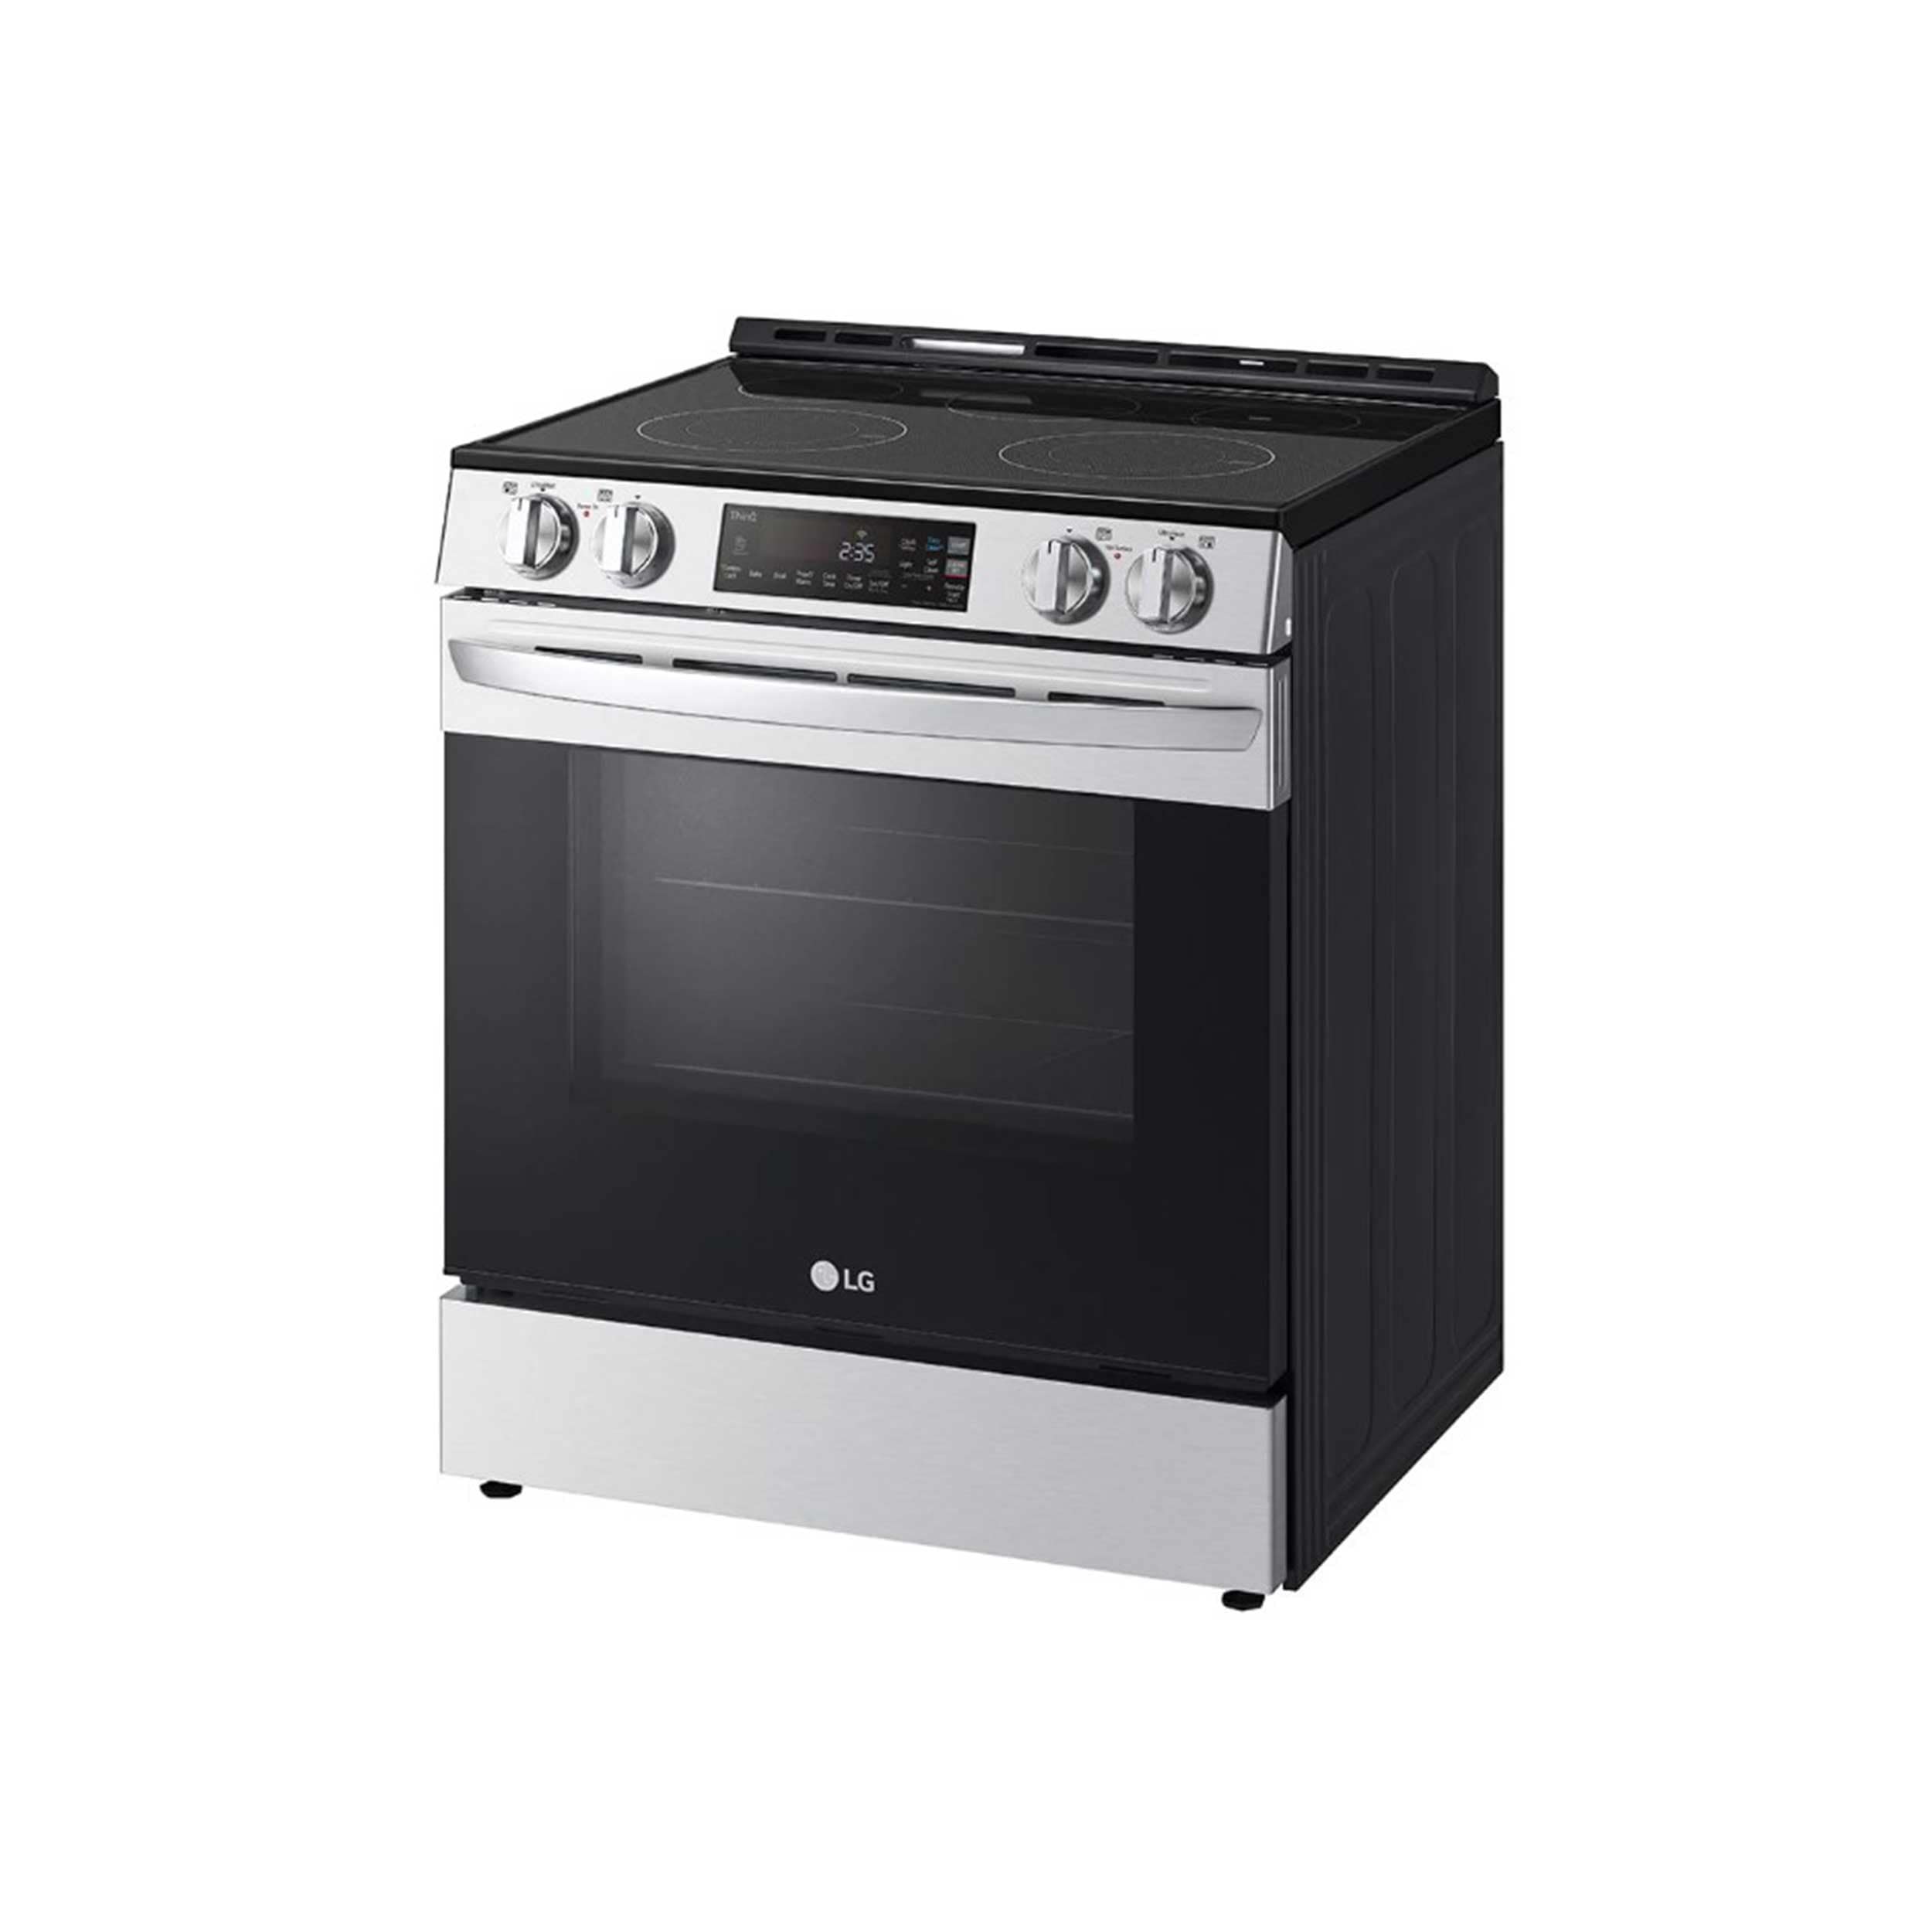 Lanbo 24 Inch 2.9 Cu.Ft Freestanding Electric Range with Air Fry